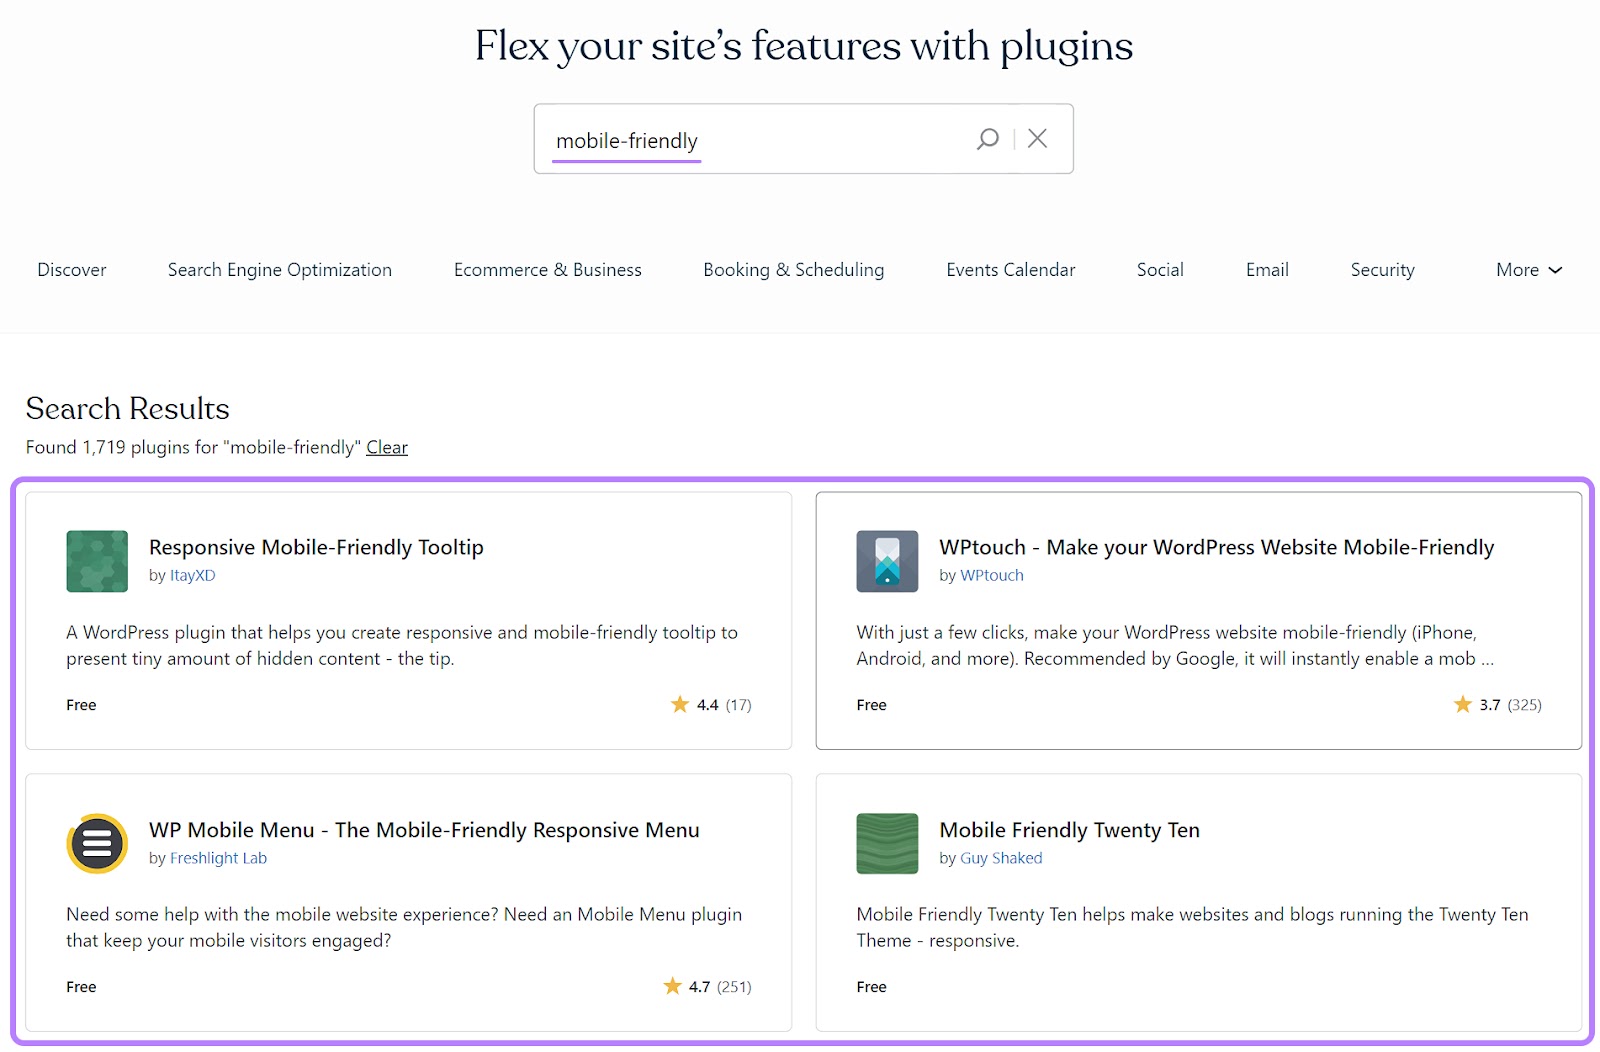 WordPress plugins results for "mobile-friendly"